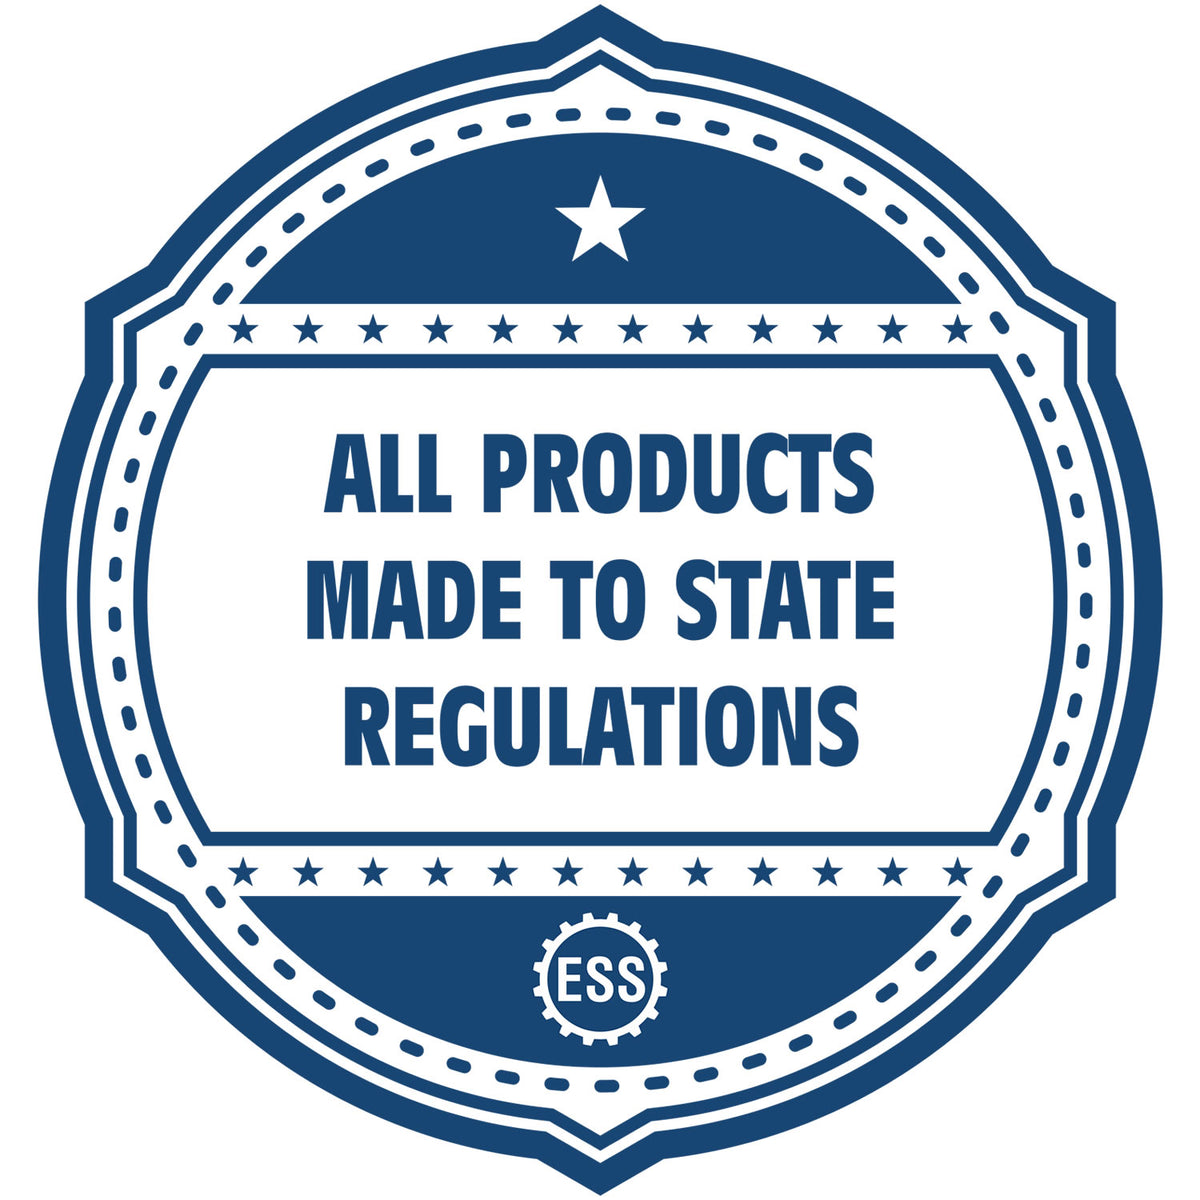 An icon or badge element for the Slim Pre-Inked Tennessee Professional Engineer Seal Stamp showing that this product is made in compliance with state regulations.